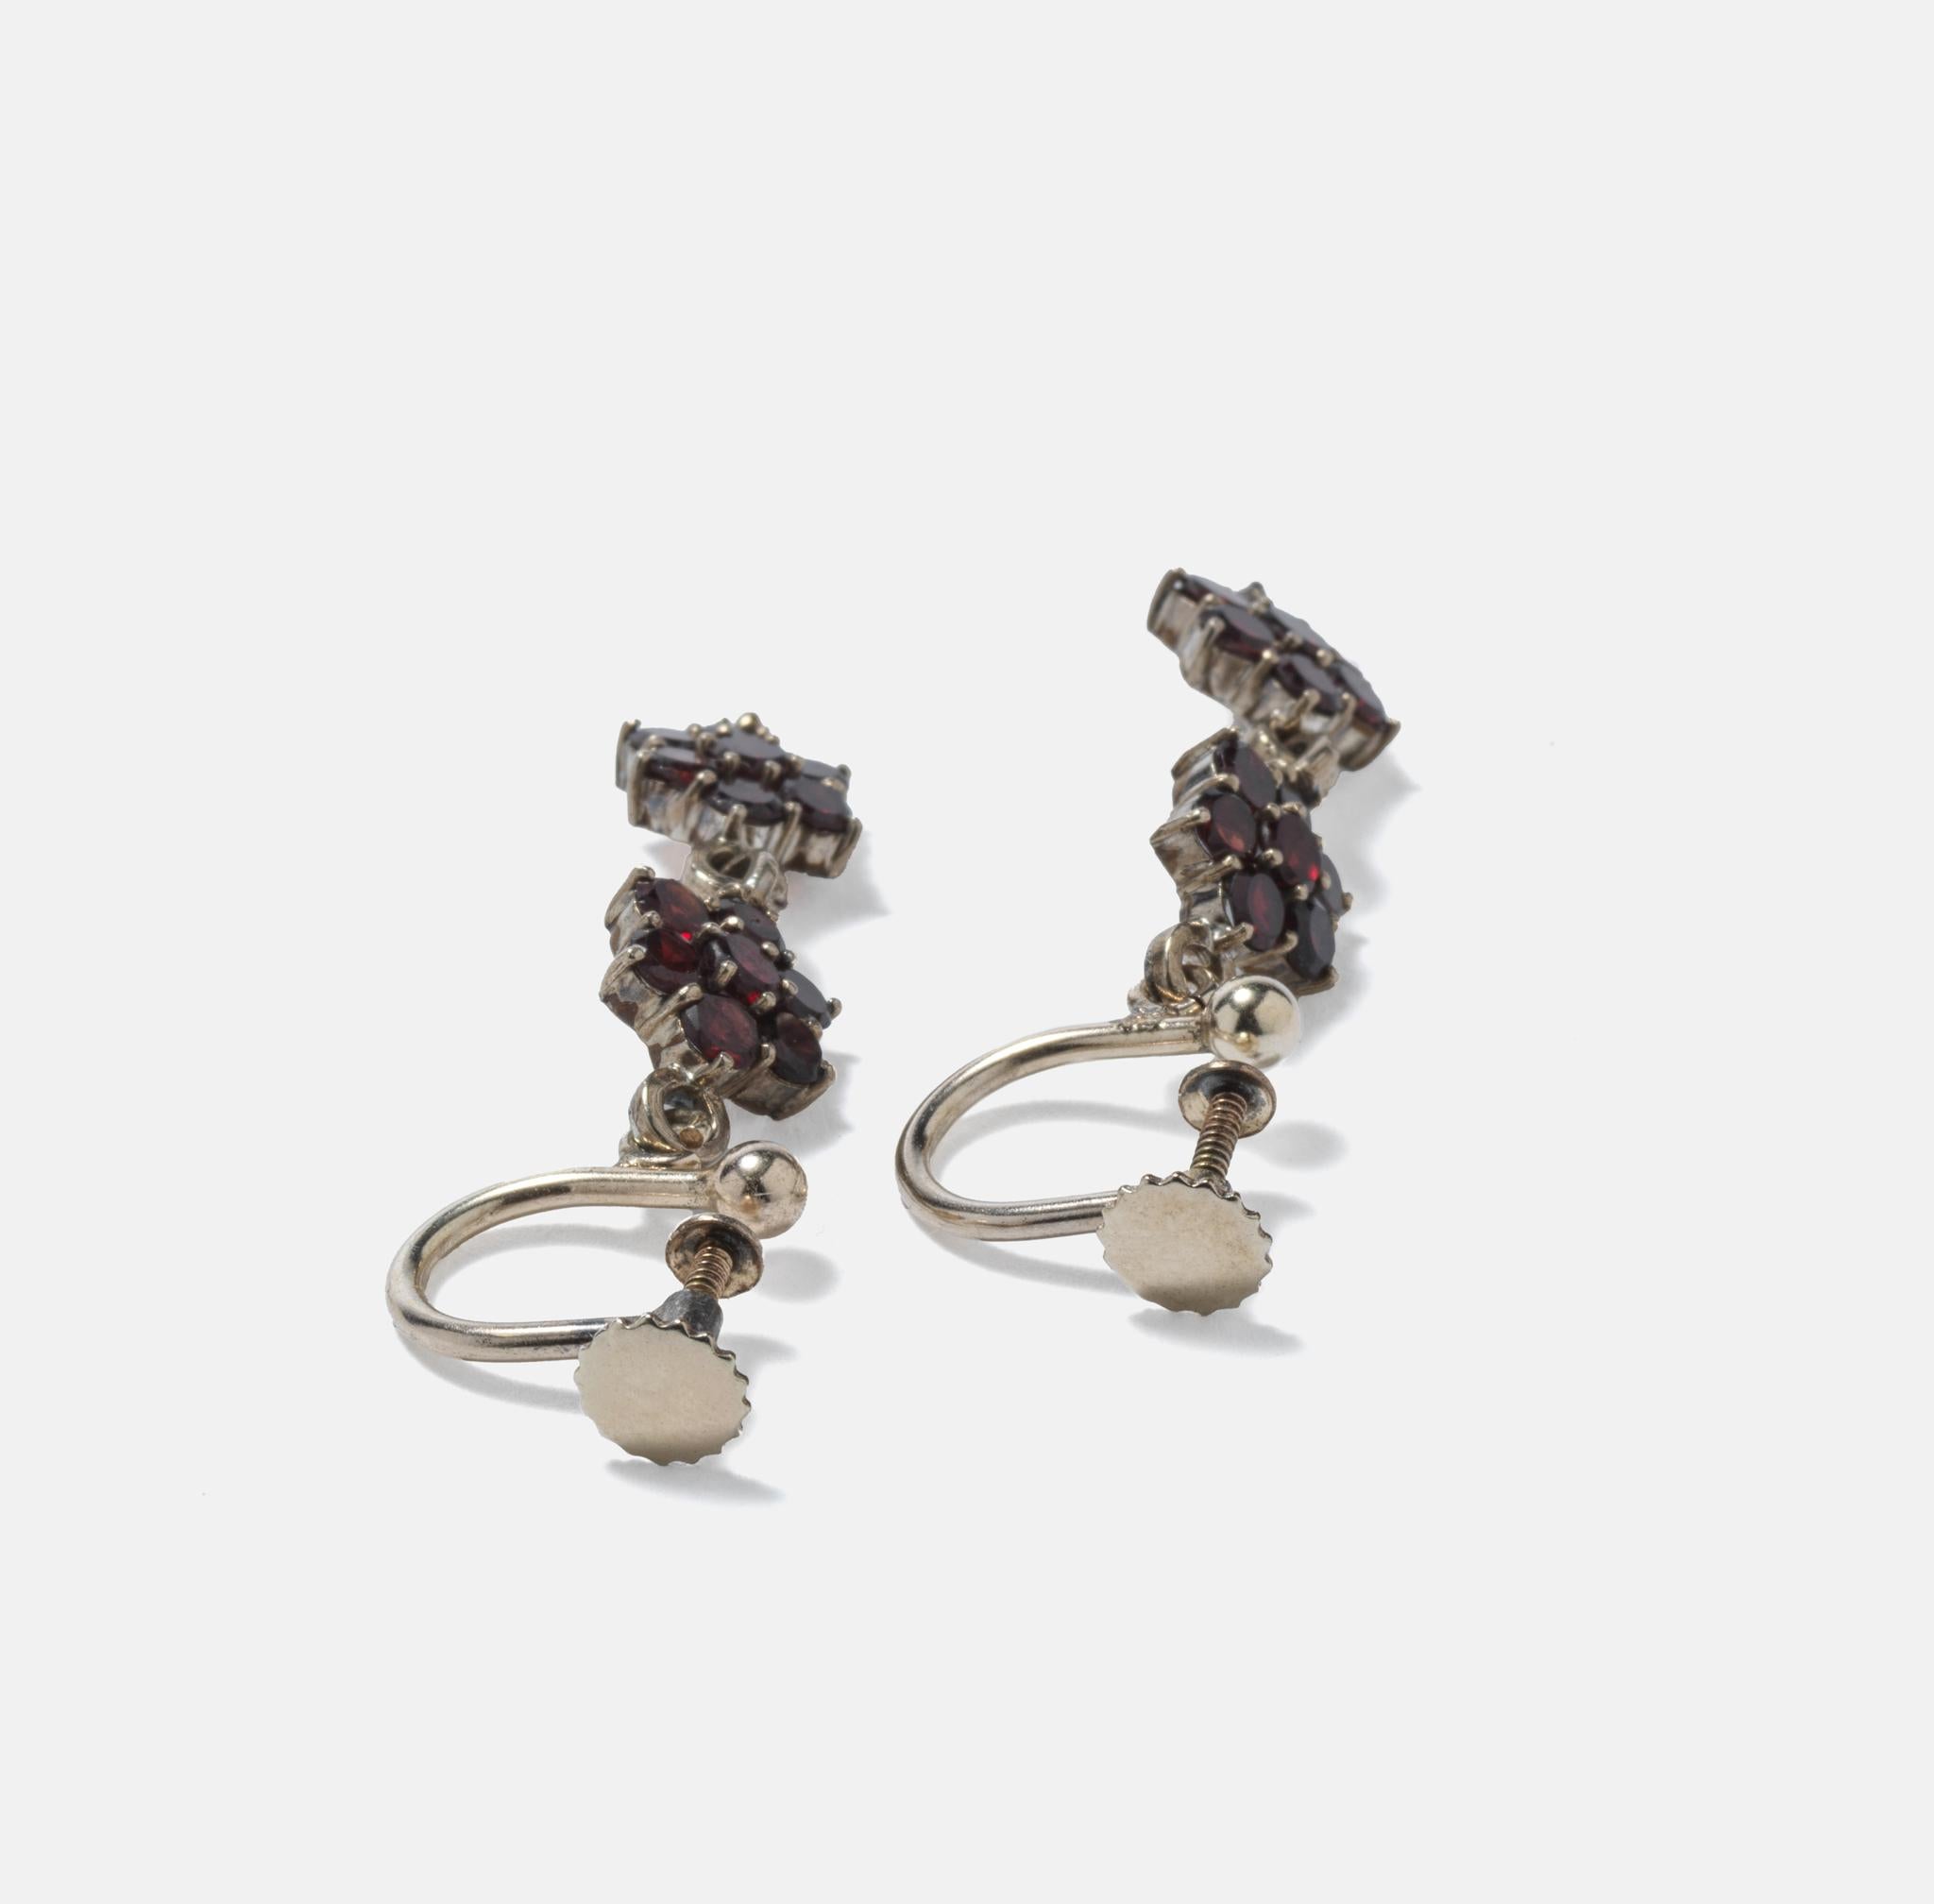 Women's Antique pair of earrings. Silver and garnets. For Sale